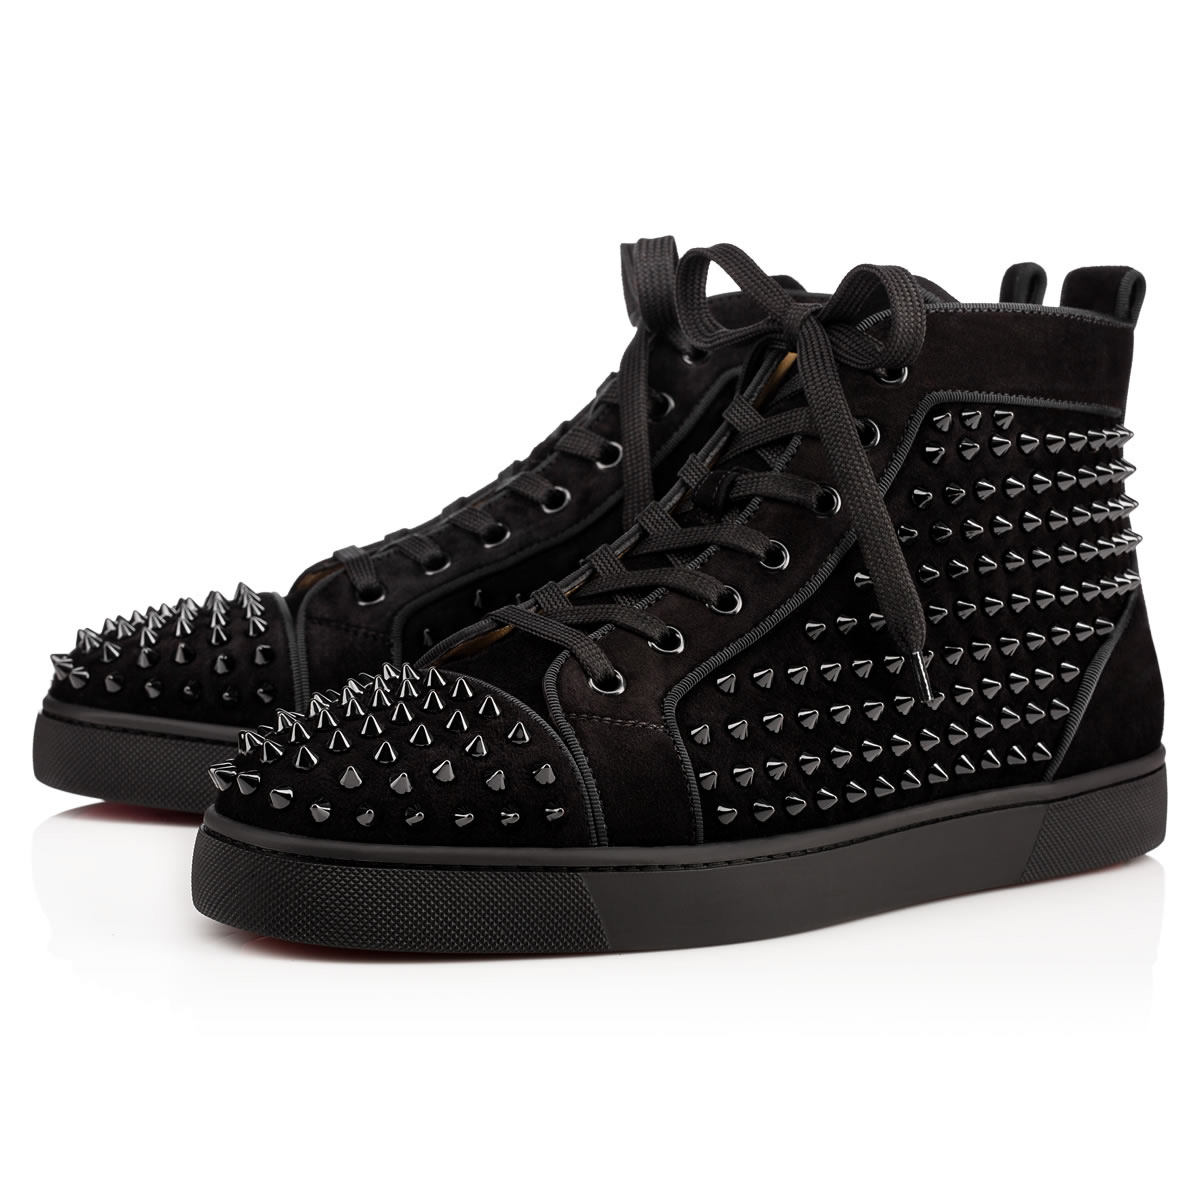 Louis Suede High Top Sneakers in Black - Christian Louboutin